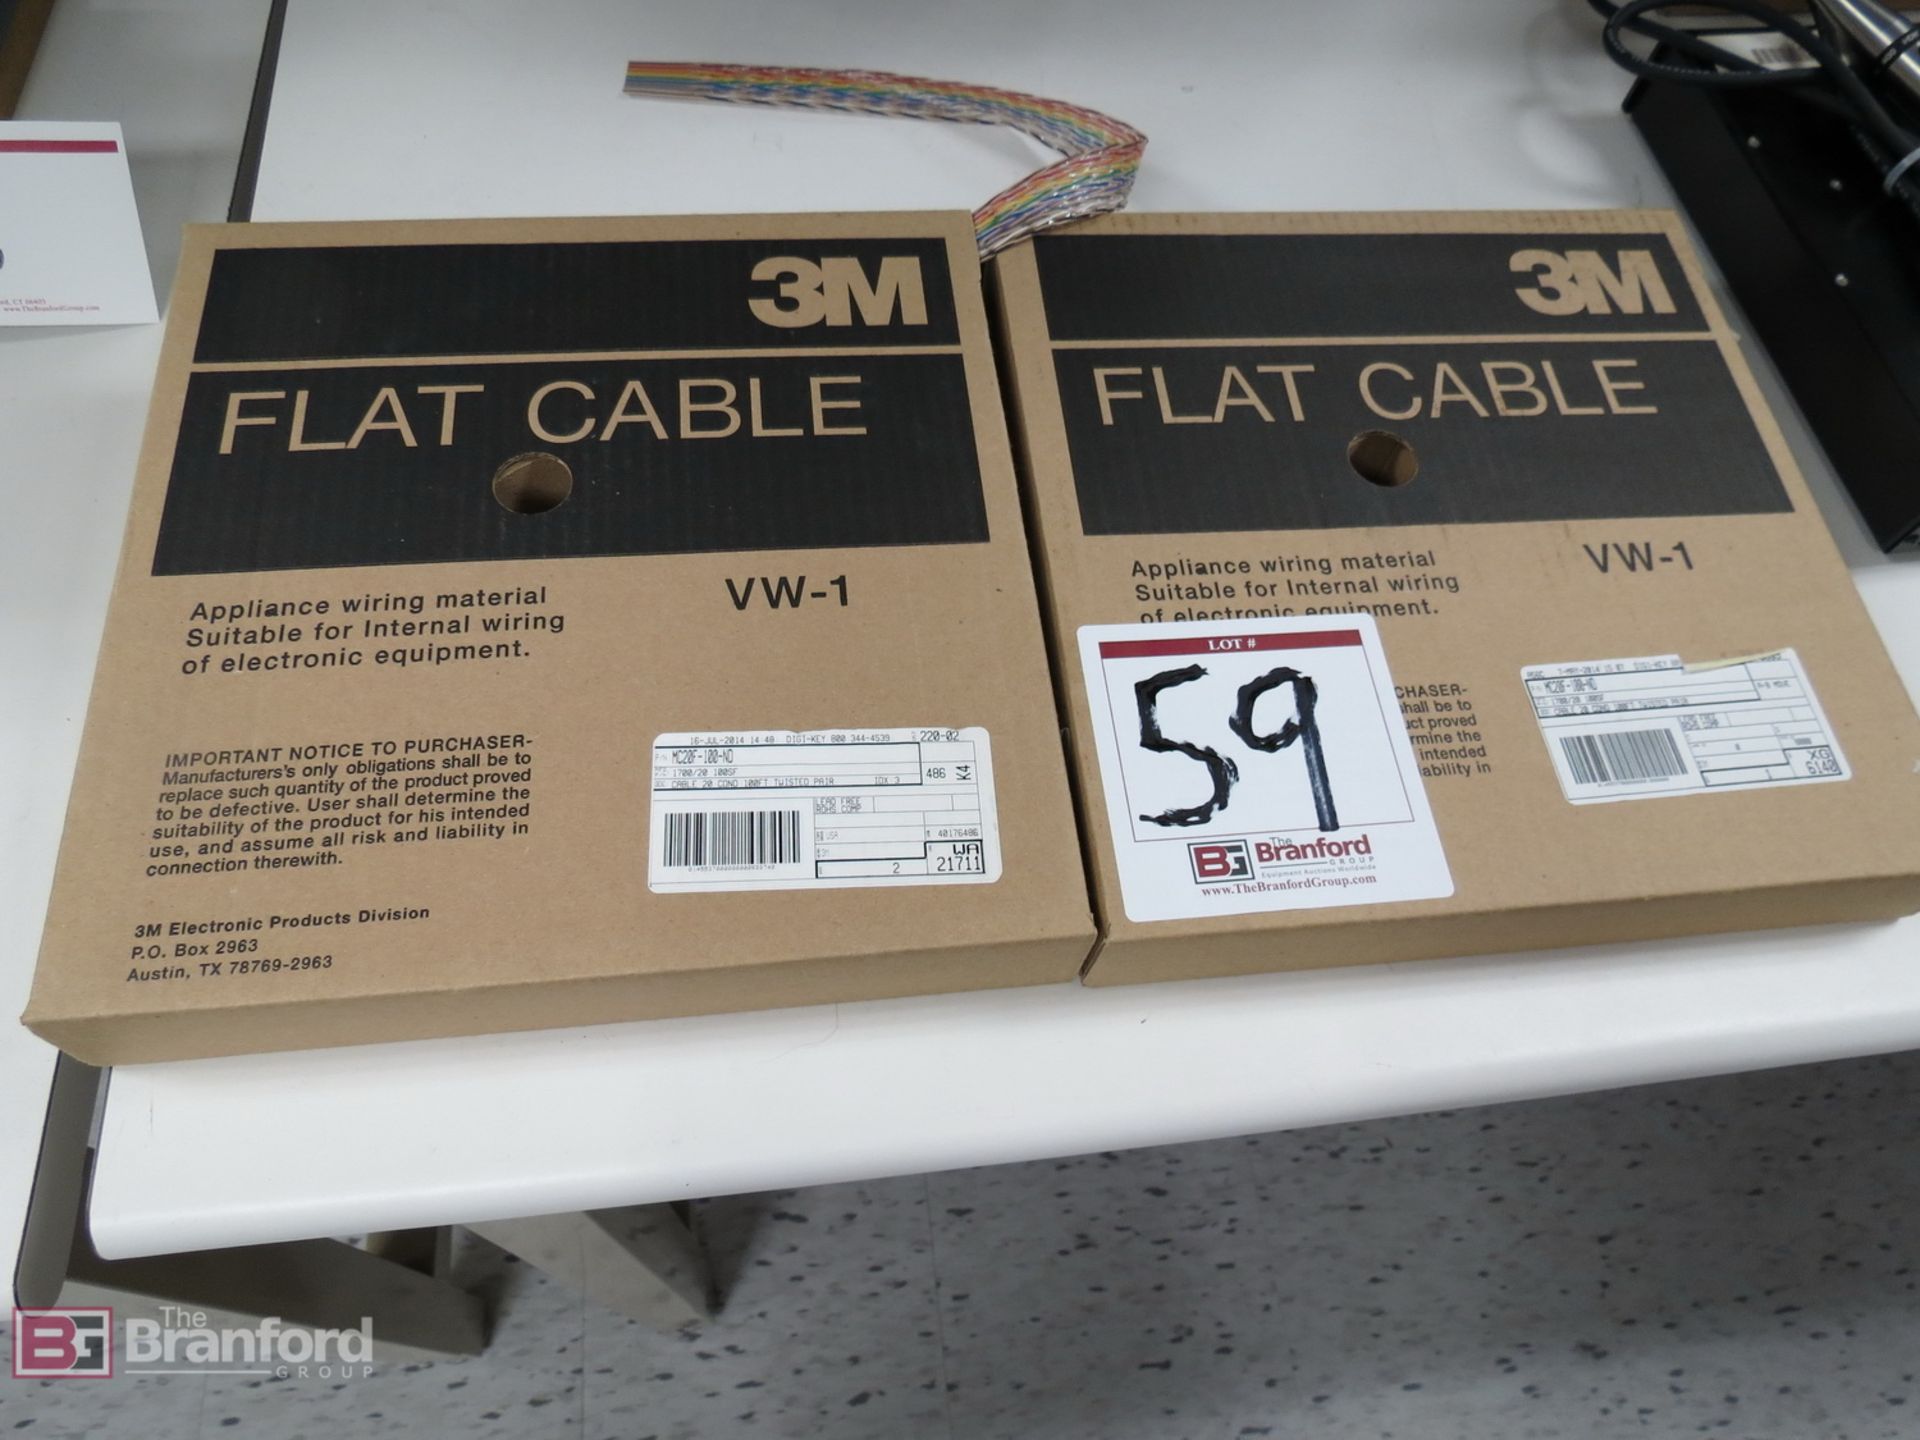 (2) Boxes of 3M VW-1 Flat Cable